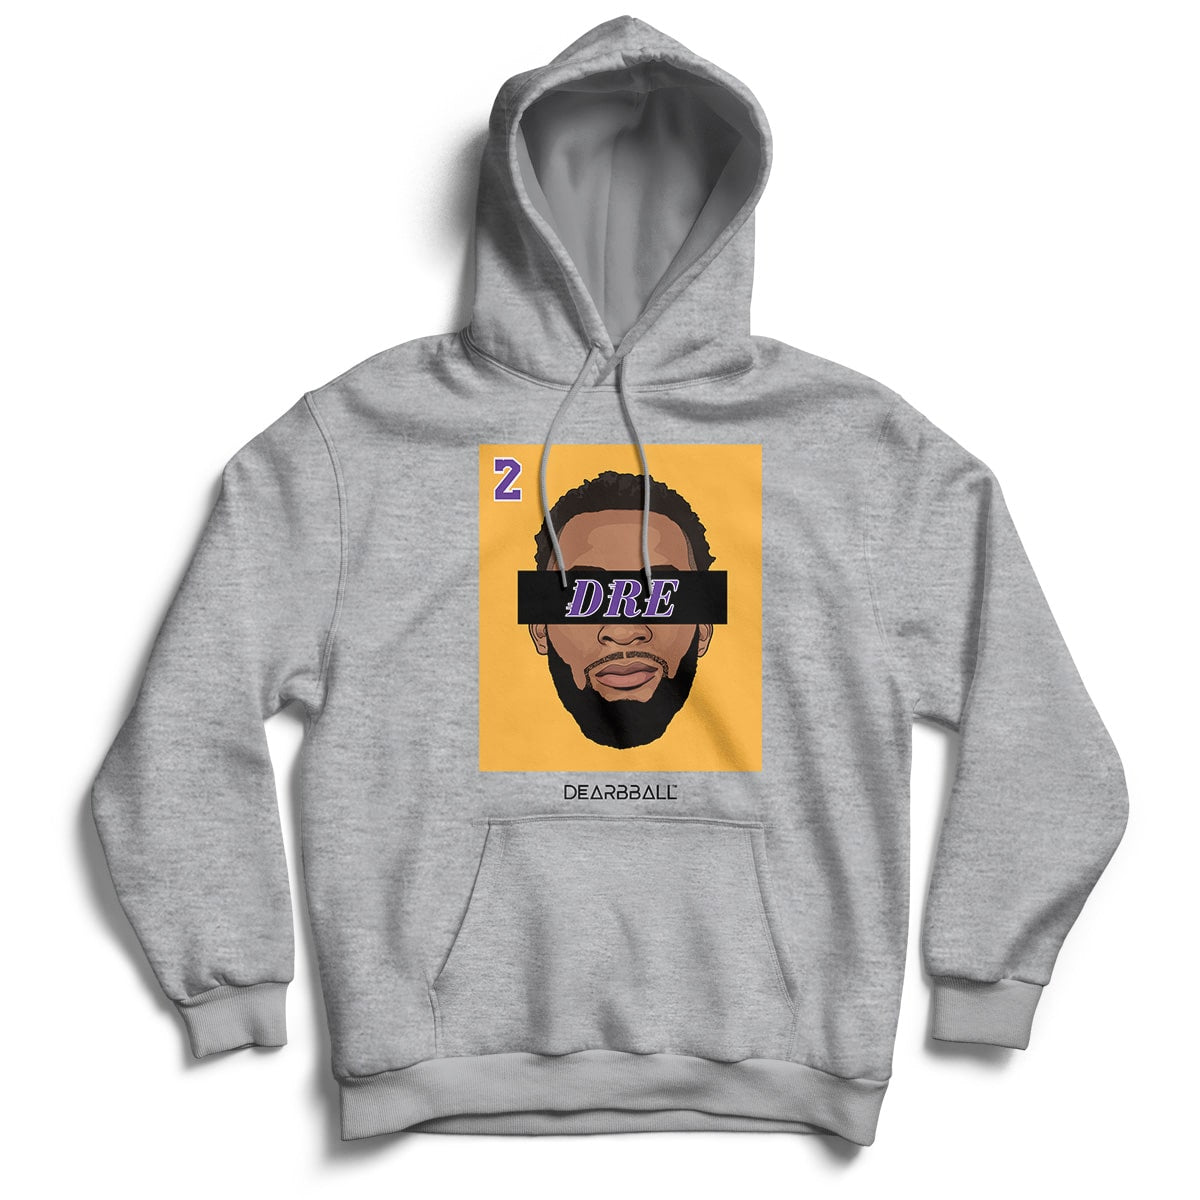 Andre Drummond Hoodie - DRE 2 Yellow Los Angeles Lakers Basketball Dearbball white